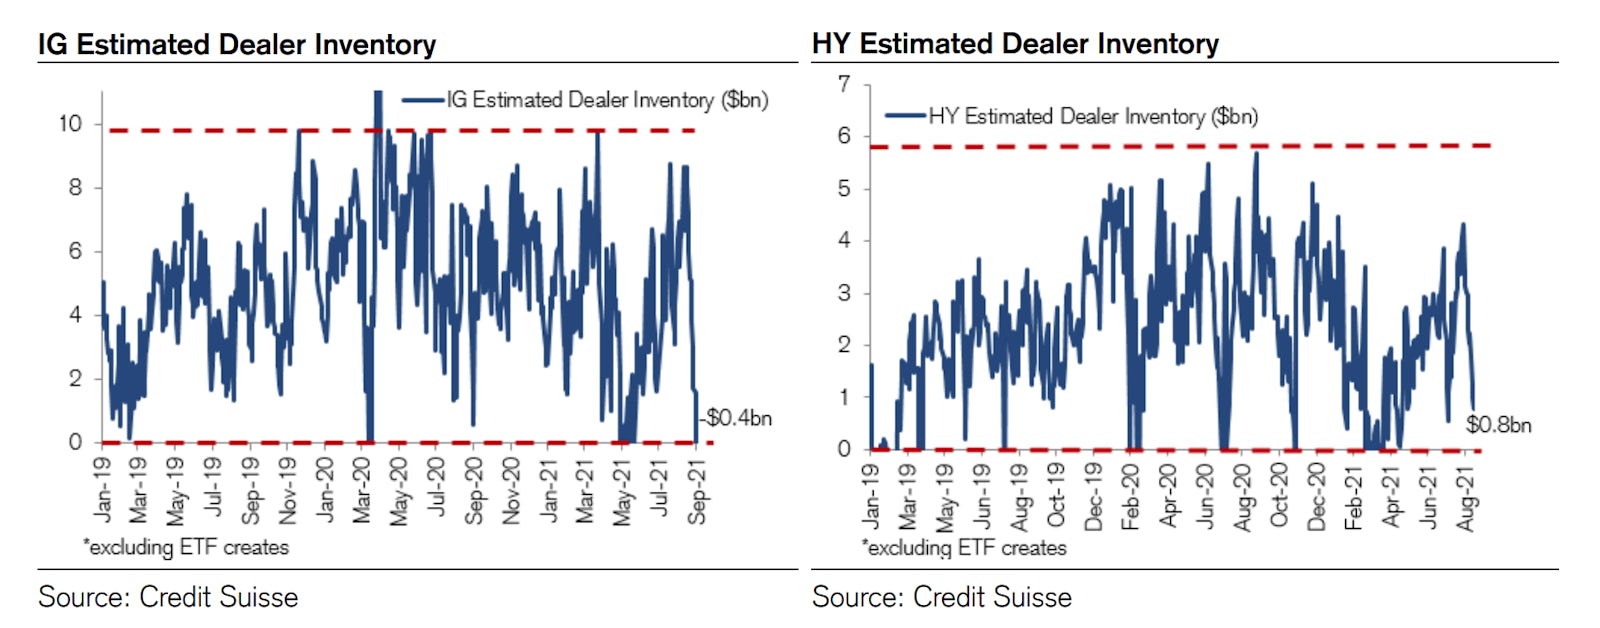 Dealer Inventories Are Way Down, Most Notably in IG | Source: Credit Suisse